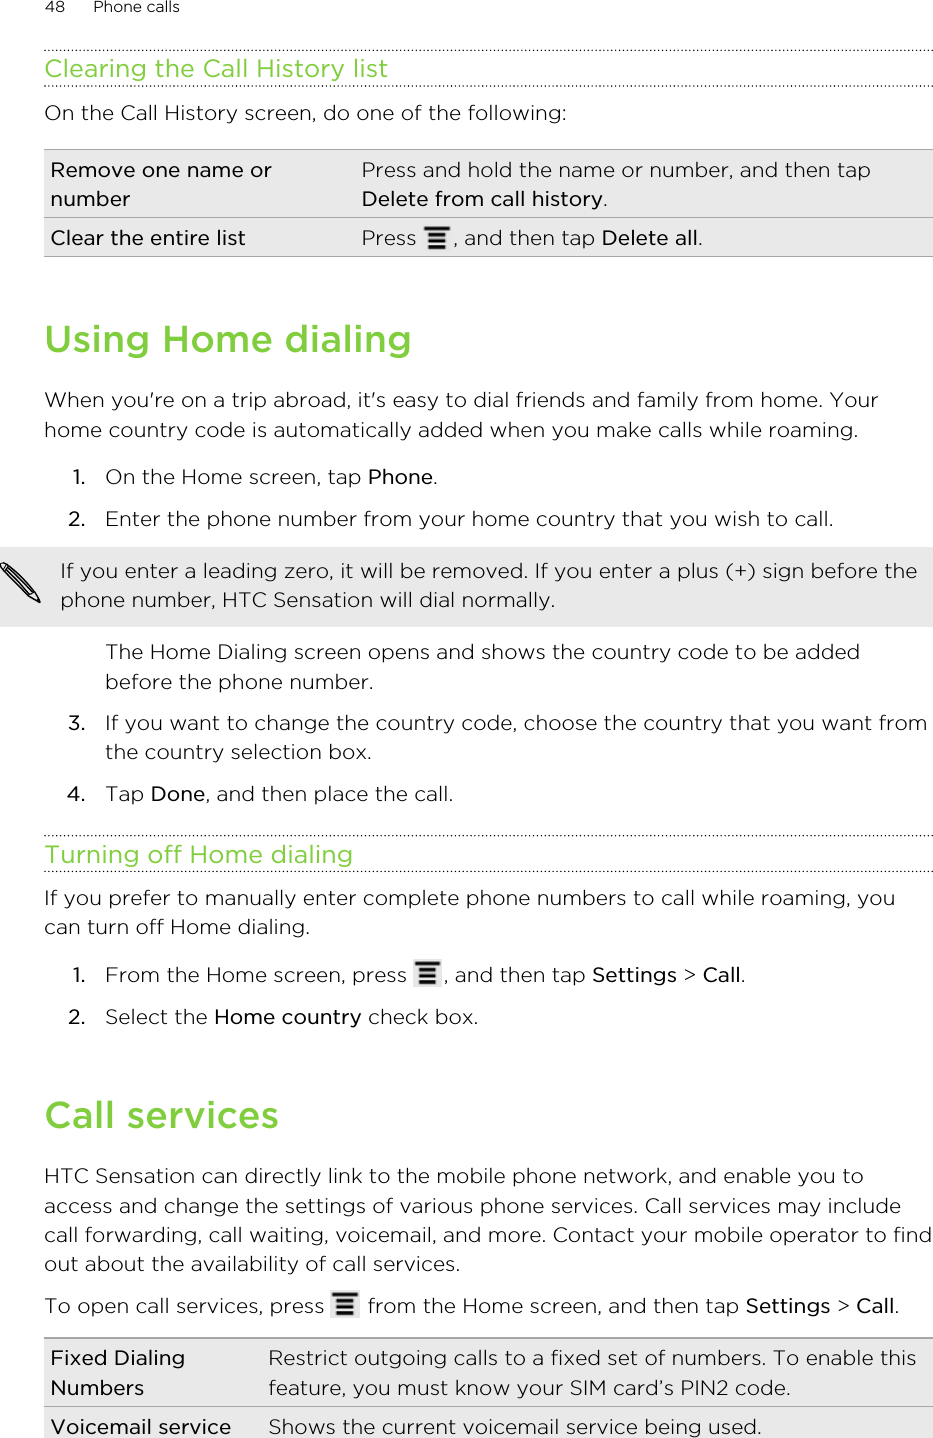 Clearing the Call History listOn the Call History screen, do one of the following:Remove one name ornumberPress and hold the name or number, and then tapDelete from call history.Clear the entire list Press  , and then tap Delete all.Using Home dialingWhen you&apos;re on a trip abroad, it&apos;s easy to dial friends and family from home. Yourhome country code is automatically added when you make calls while roaming.1. On the Home screen, tap Phone.2. Enter the phone number from your home country that you wish to call. If you enter a leading zero, it will be removed. If you enter a plus (+) sign before thephone number, HTC Sensation will dial normally.The Home Dialing screen opens and shows the country code to be addedbefore the phone number.3. If you want to change the country code, choose the country that you want fromthe country selection box.4. Tap Done, and then place the call.Turning off Home dialingIf you prefer to manually enter complete phone numbers to call while roaming, youcan turn off Home dialing.1. From the Home screen, press  , and then tap Settings &gt; Call.2. Select the Home country check box.Call servicesHTC Sensation can directly link to the mobile phone network, and enable you toaccess and change the settings of various phone services. Call services may includecall forwarding, call waiting, voicemail, and more. Contact your mobile operator to findout about the availability of call services.To open call services, press   from the Home screen, and then tap Settings &gt; Call.Fixed DialingNumbersRestrict outgoing calls to a fixed set of numbers. To enable thisfeature, you must know your SIM card’s PIN2 code.Voicemail service Shows the current voicemail service being used.48 Phone calls